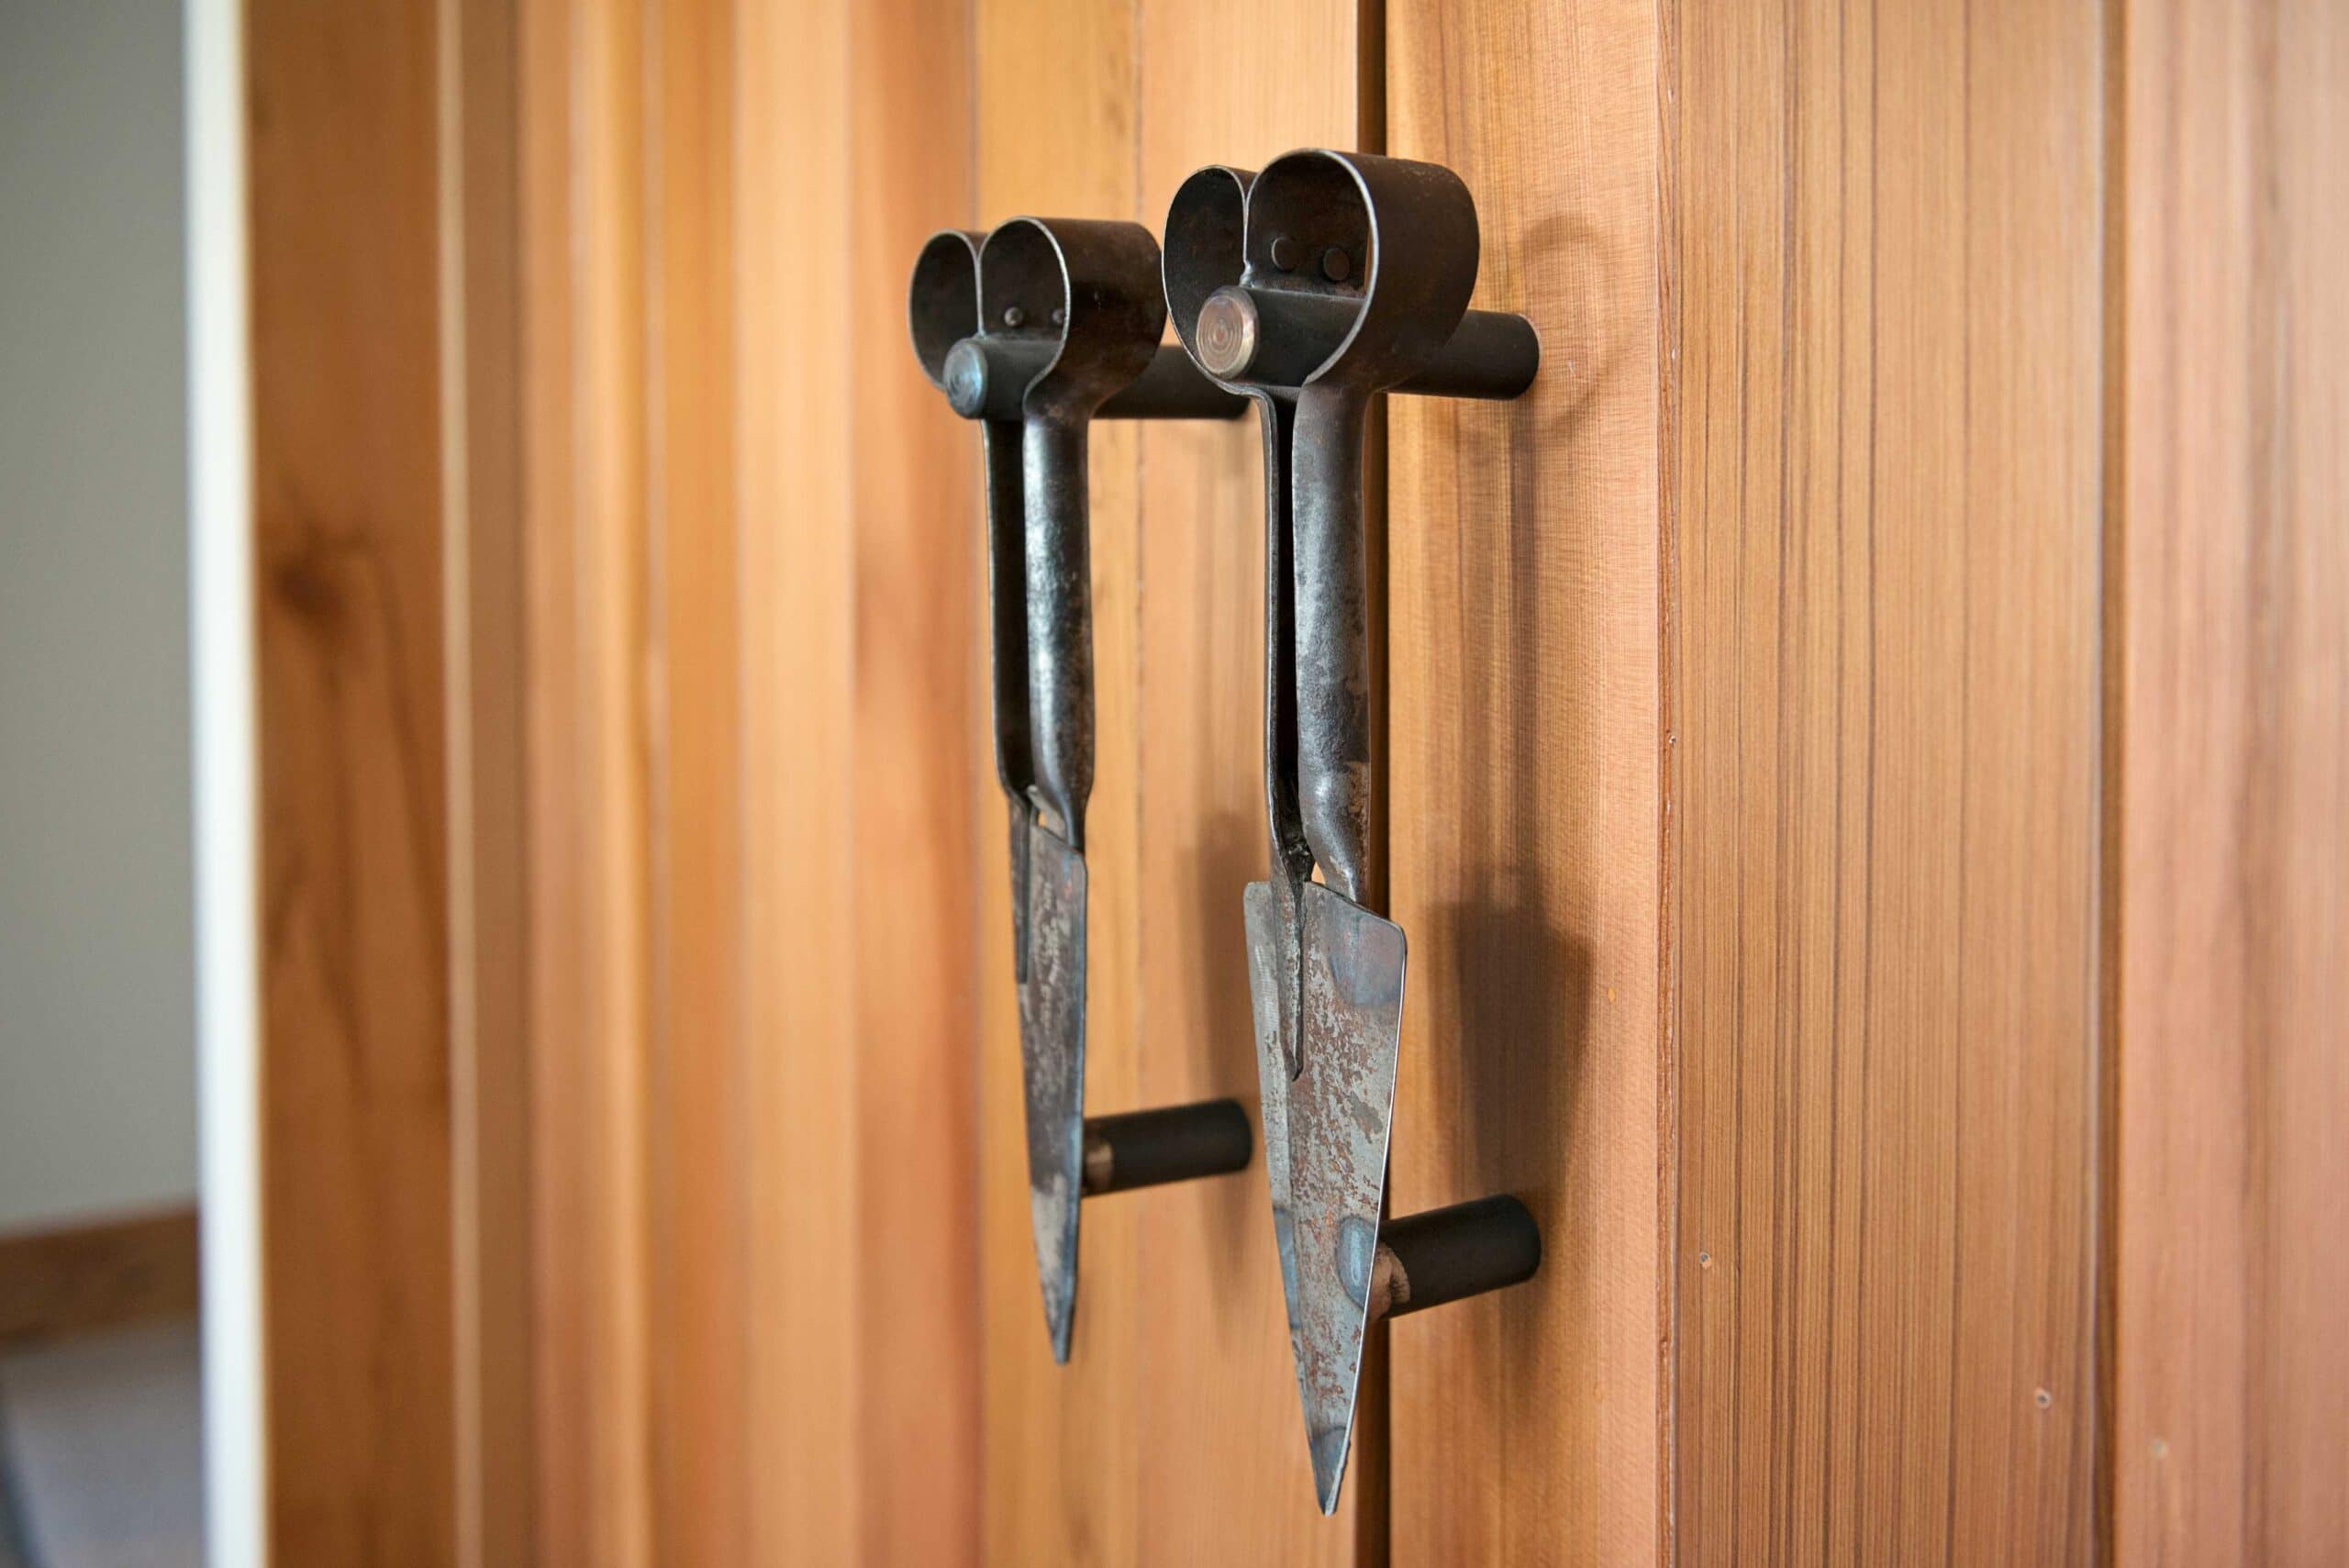  Recycled farm implements were used as door pulls. Lockfit Timaru made a wonderful job of these for us.